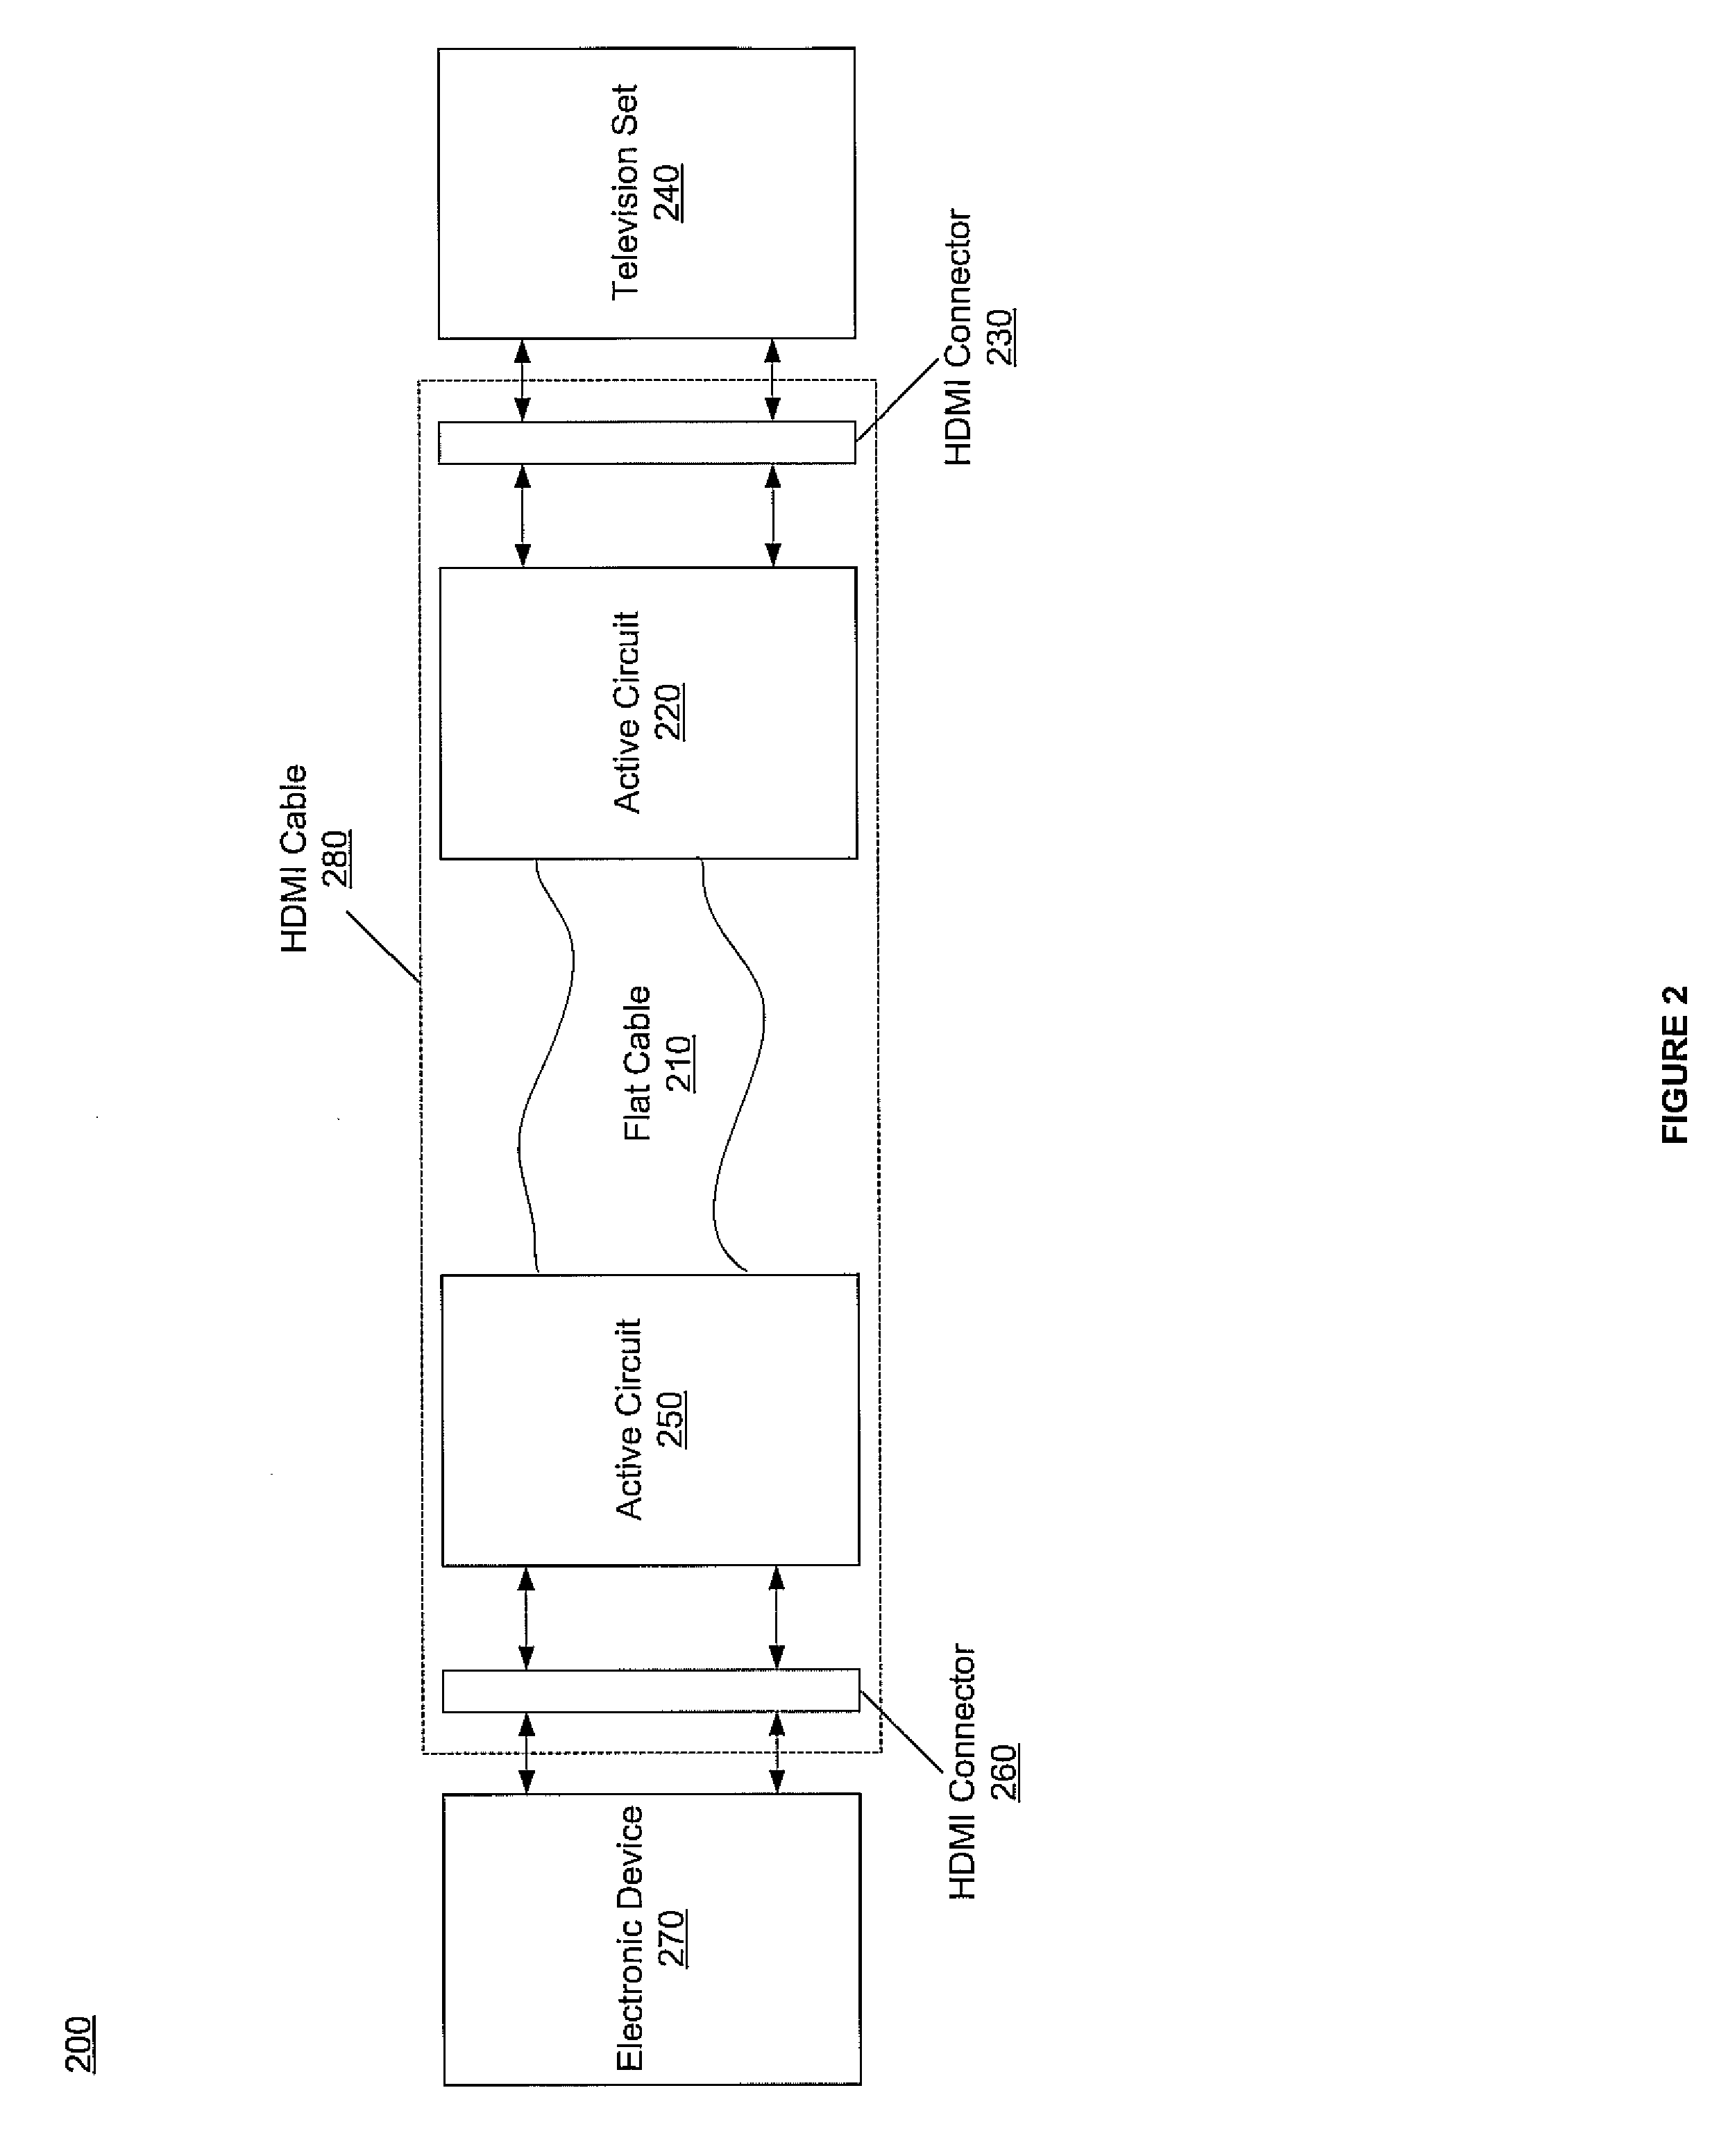 Flat cable for mounted display devices